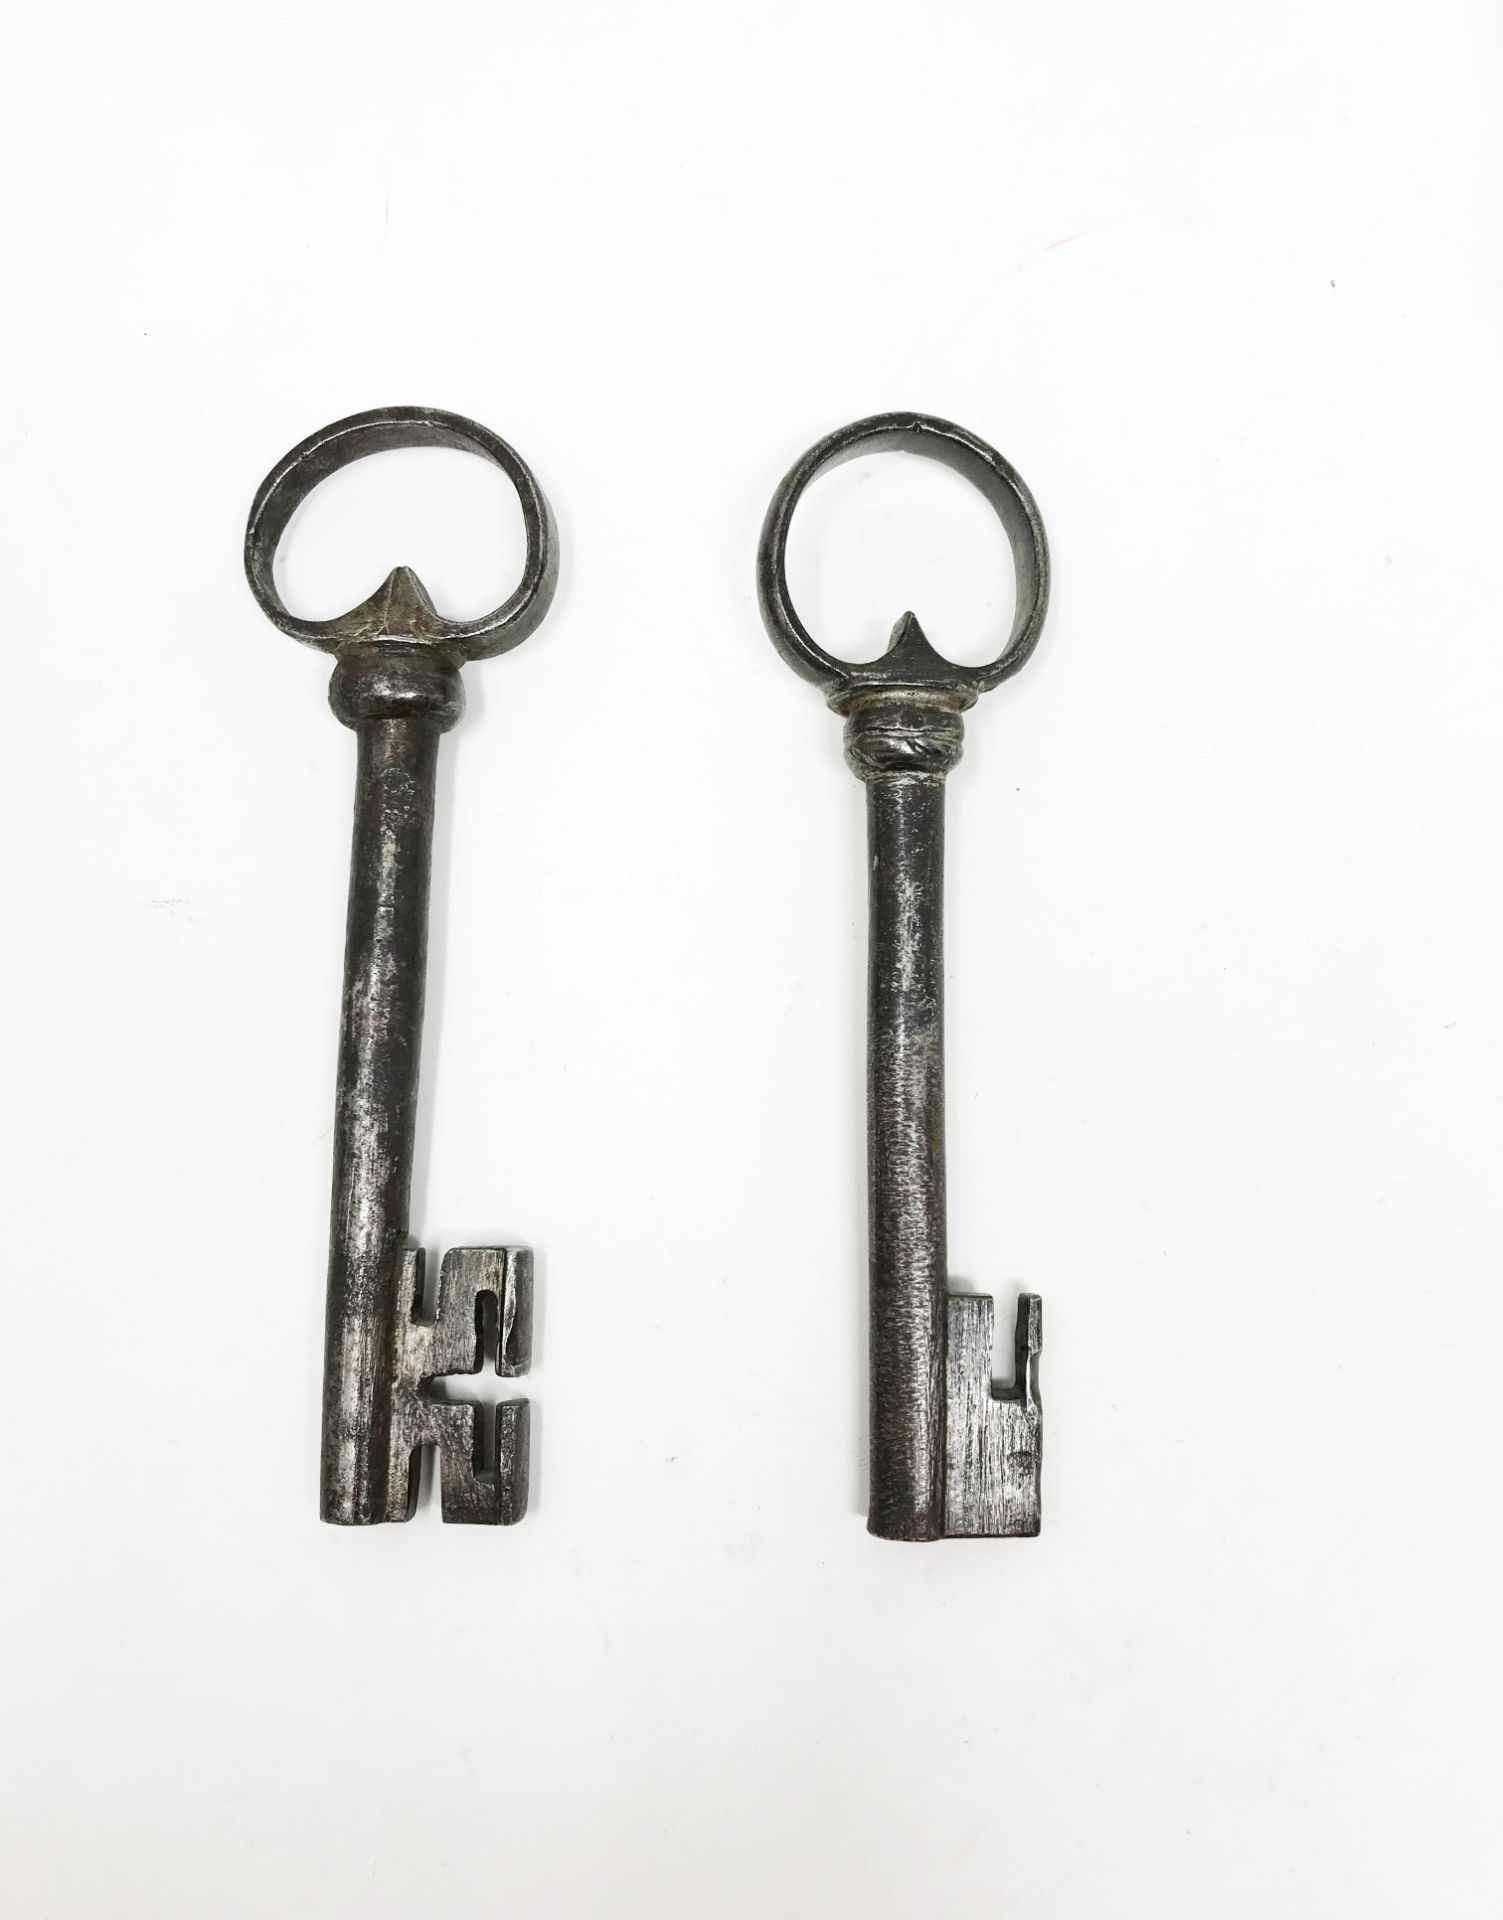 Two German keys13, 88 - 13, 56 cmPart of the chapter "From beyond the Rhine".